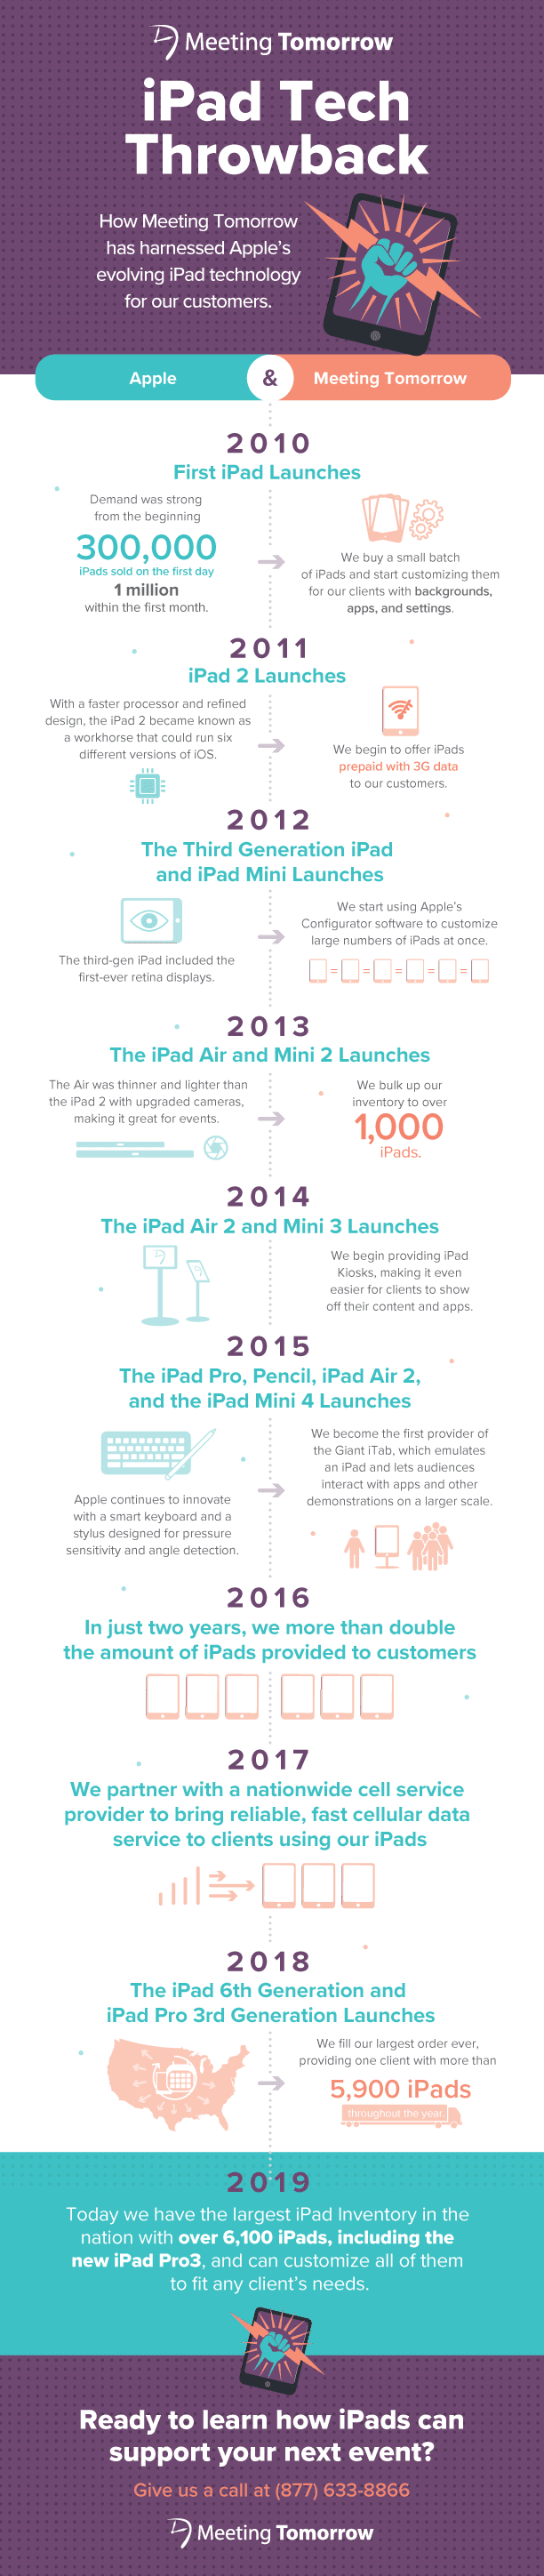 history of ipads at meetings and events